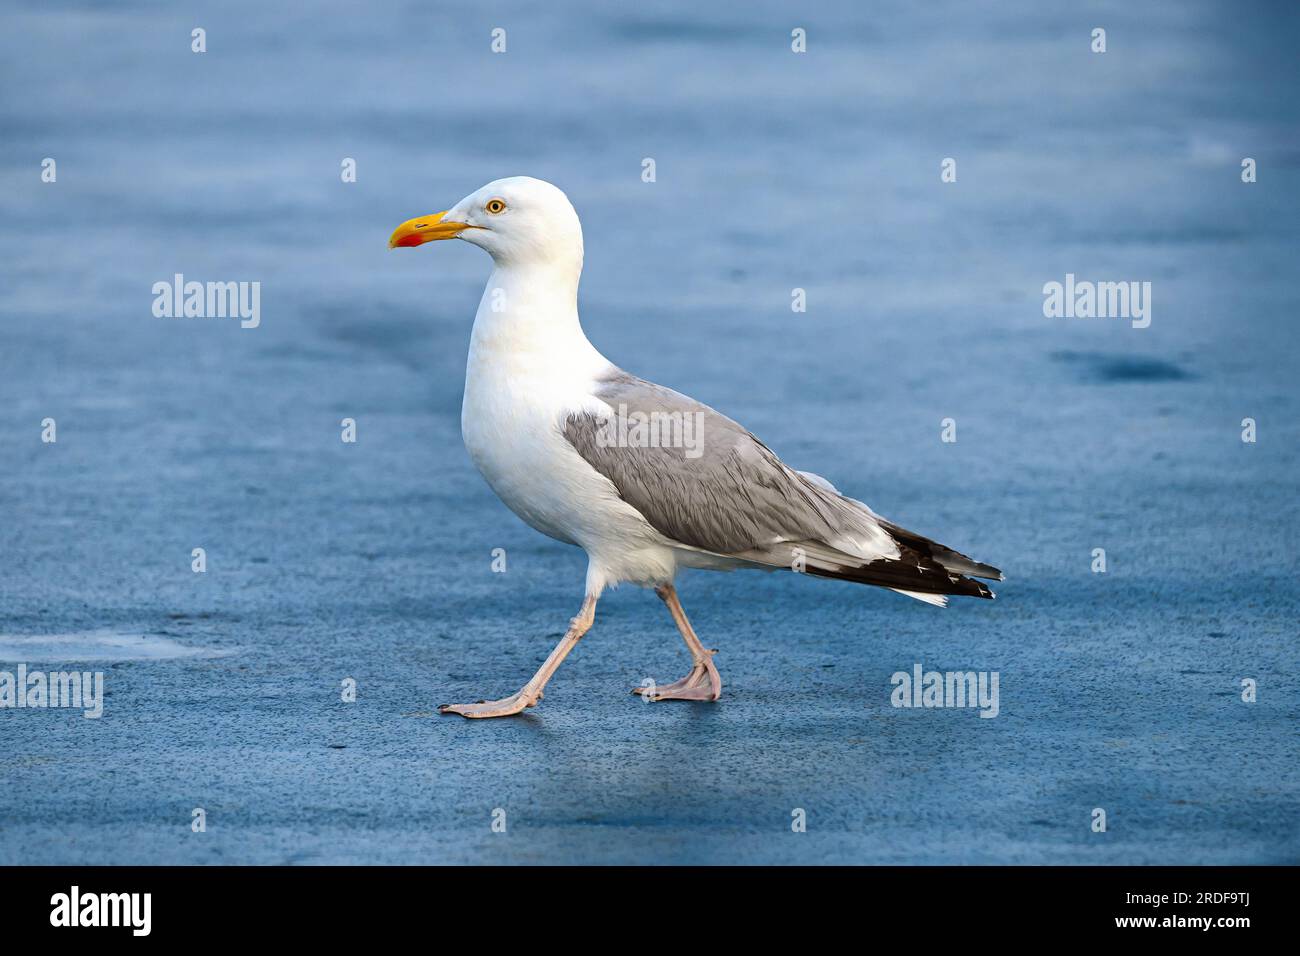 A European Herring Gull (Larus argentatus) on the deck of a ship. Stock Photo